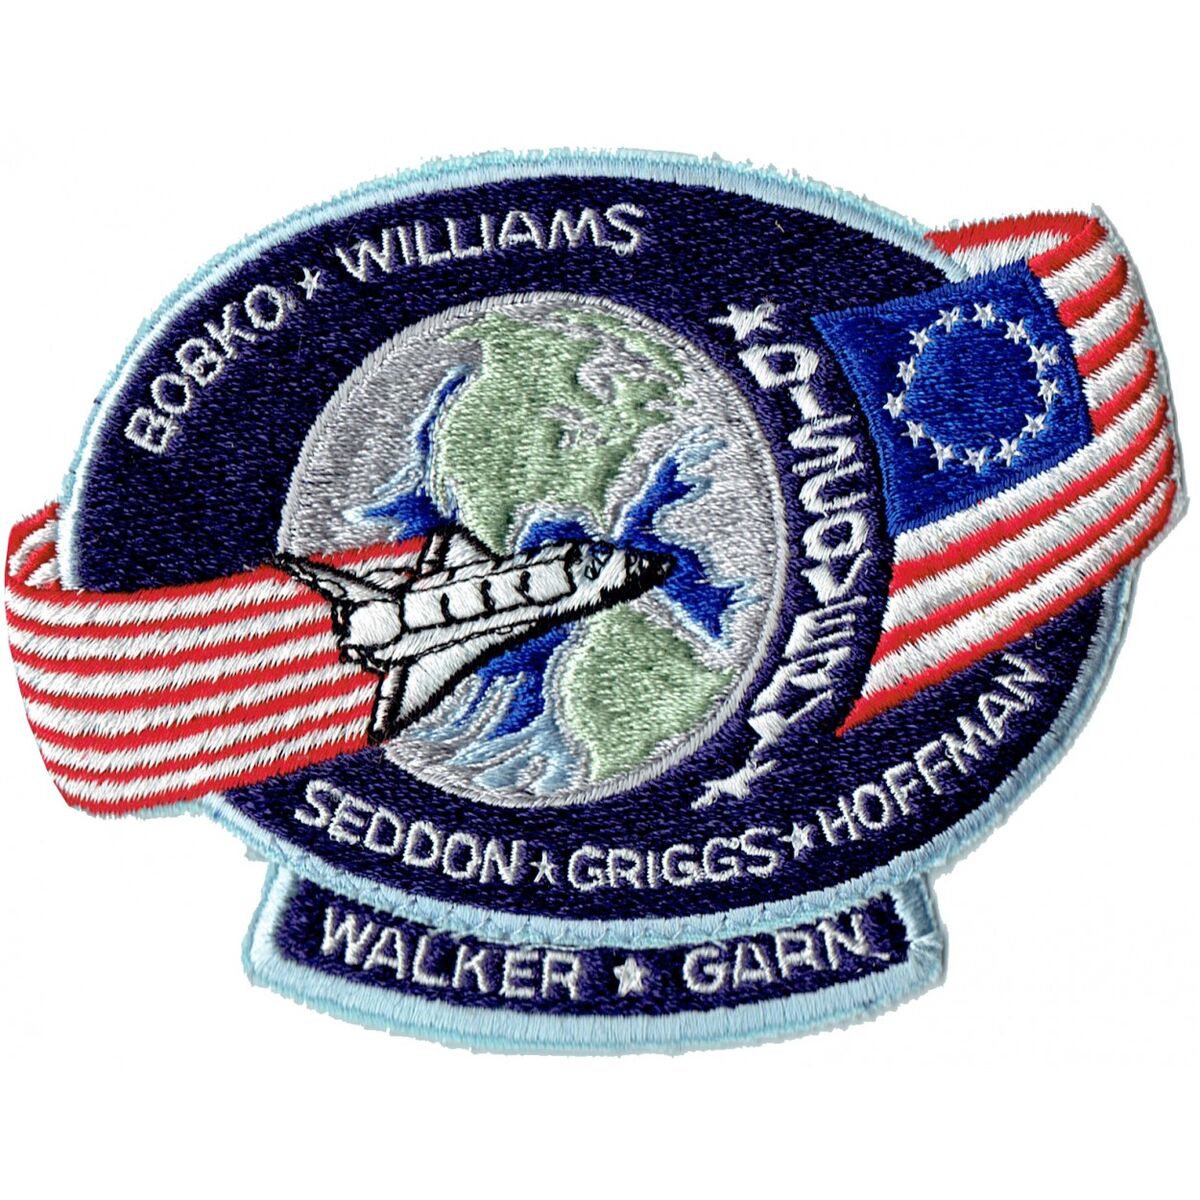 STS-51-D | Space Patches Wiki | Fandom